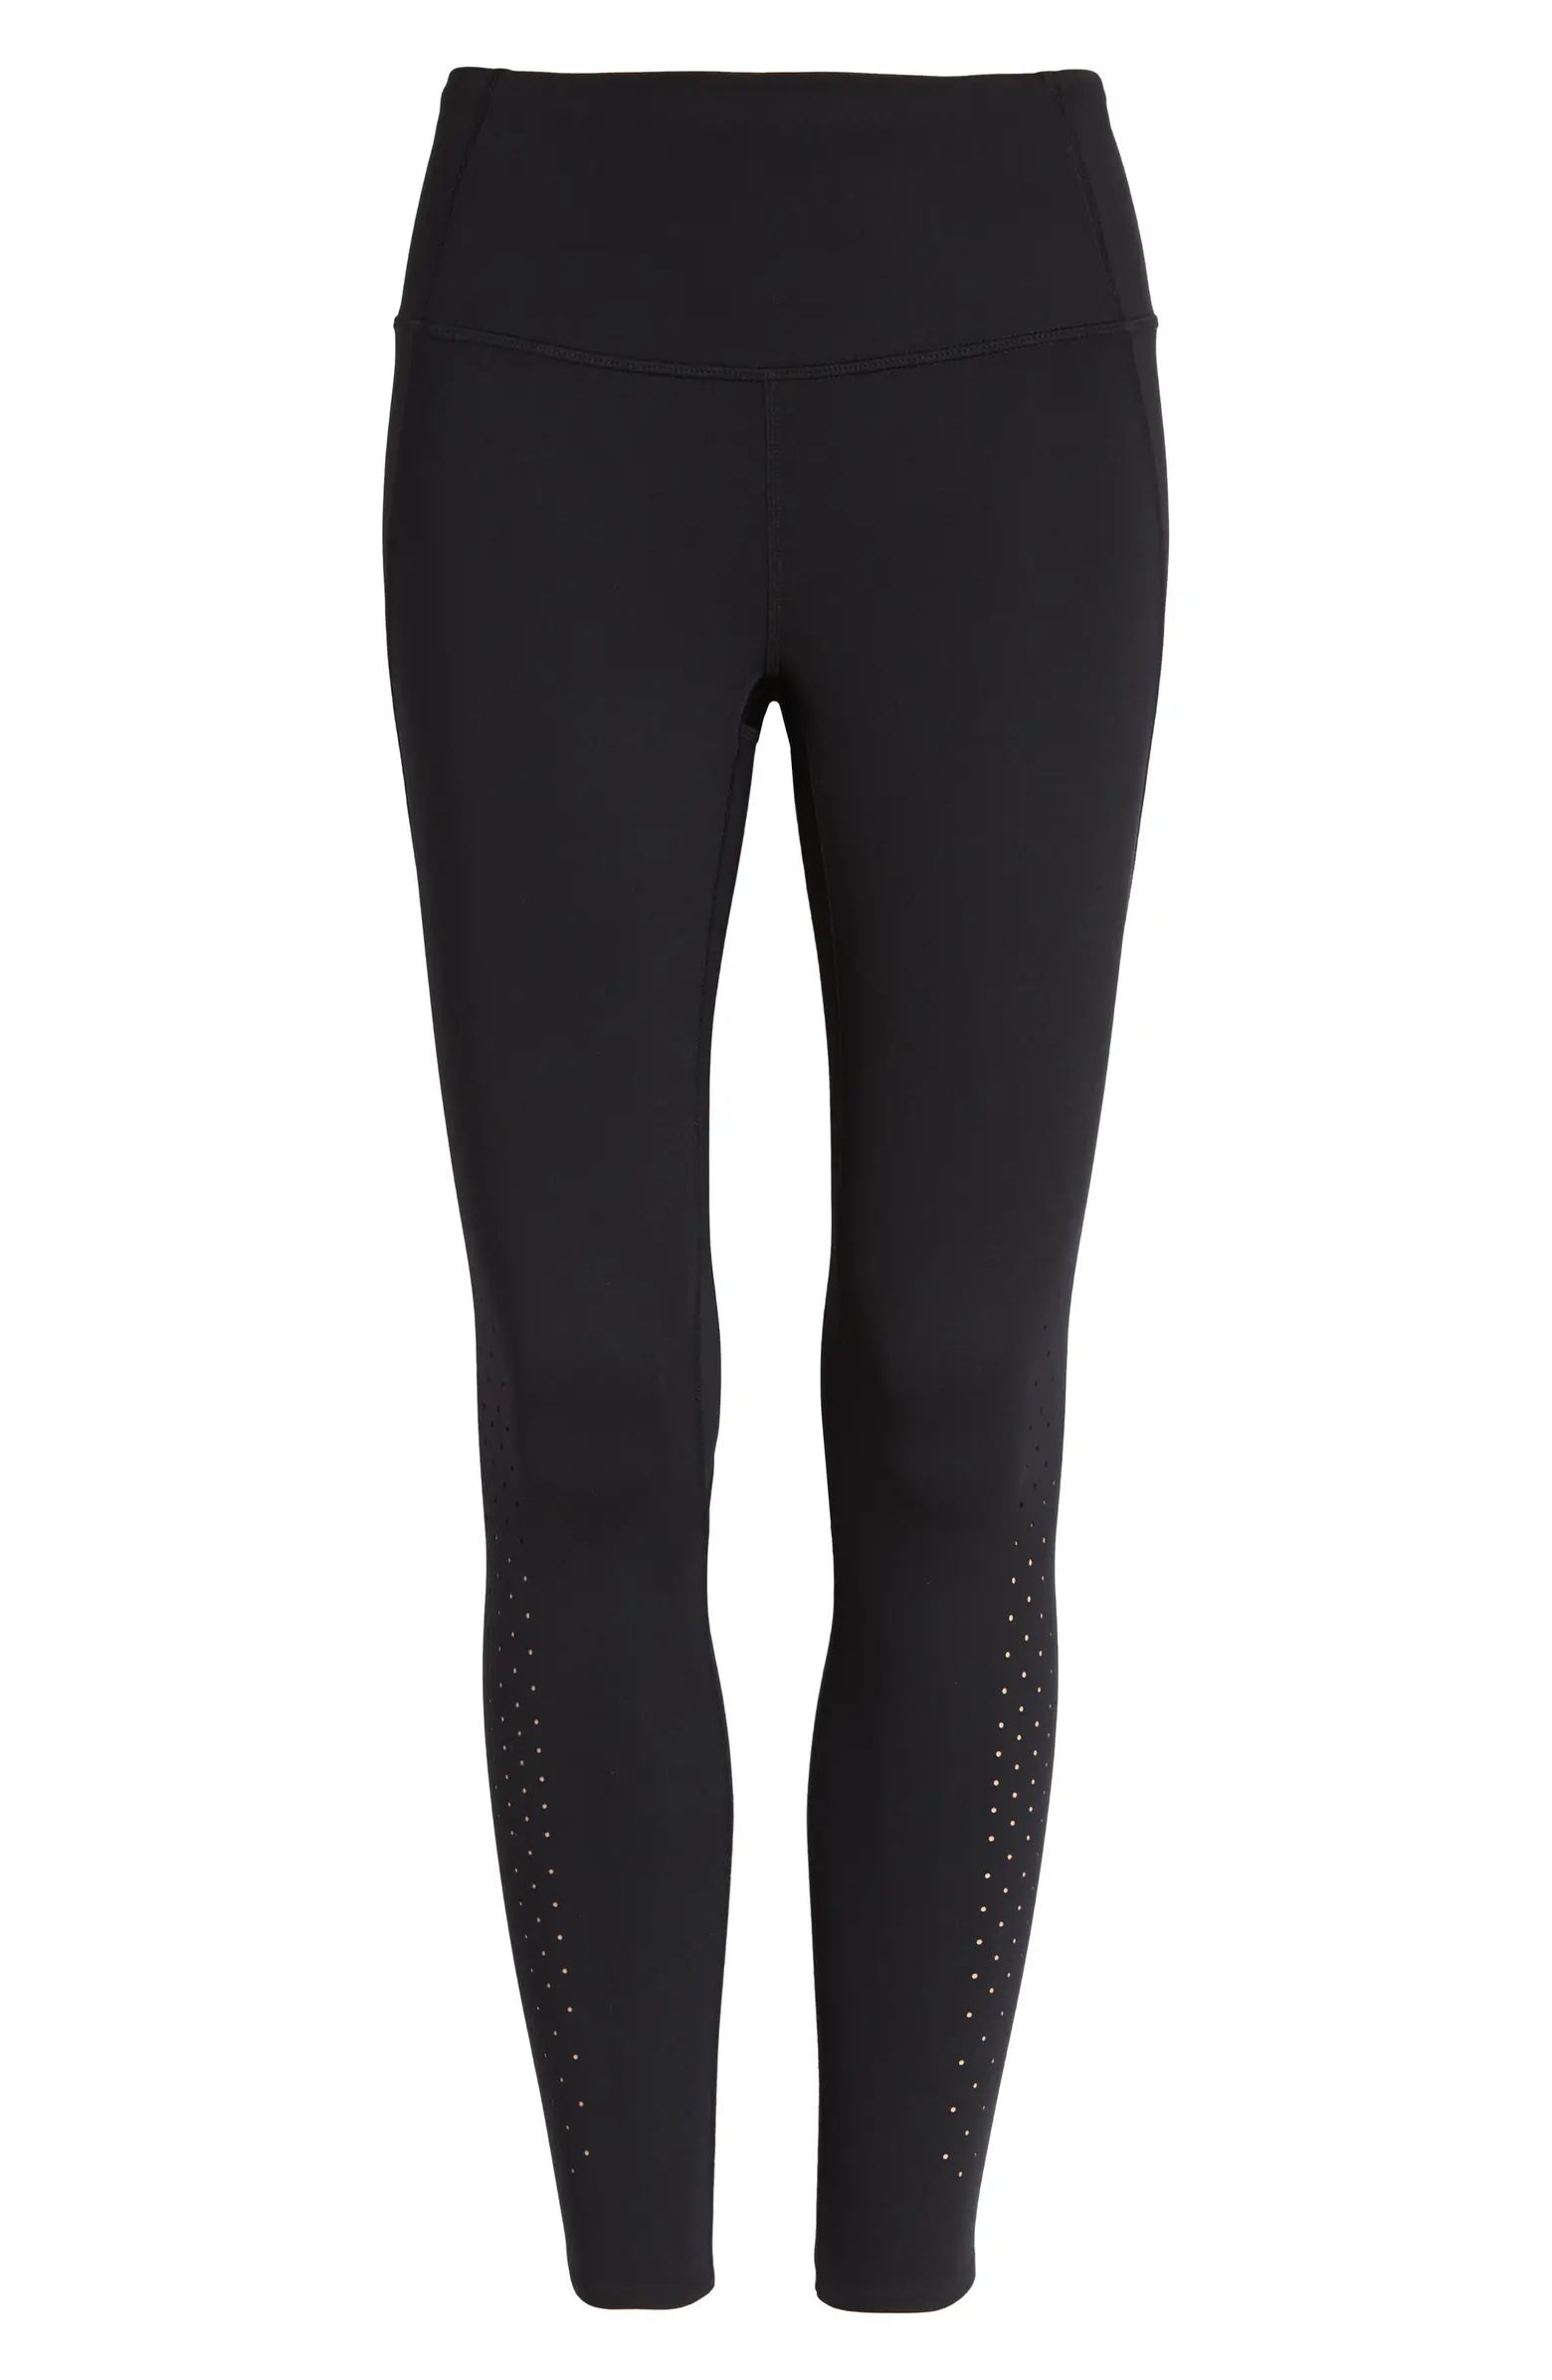 Dotty Perforated 7/8 Leggings | Nordstrom